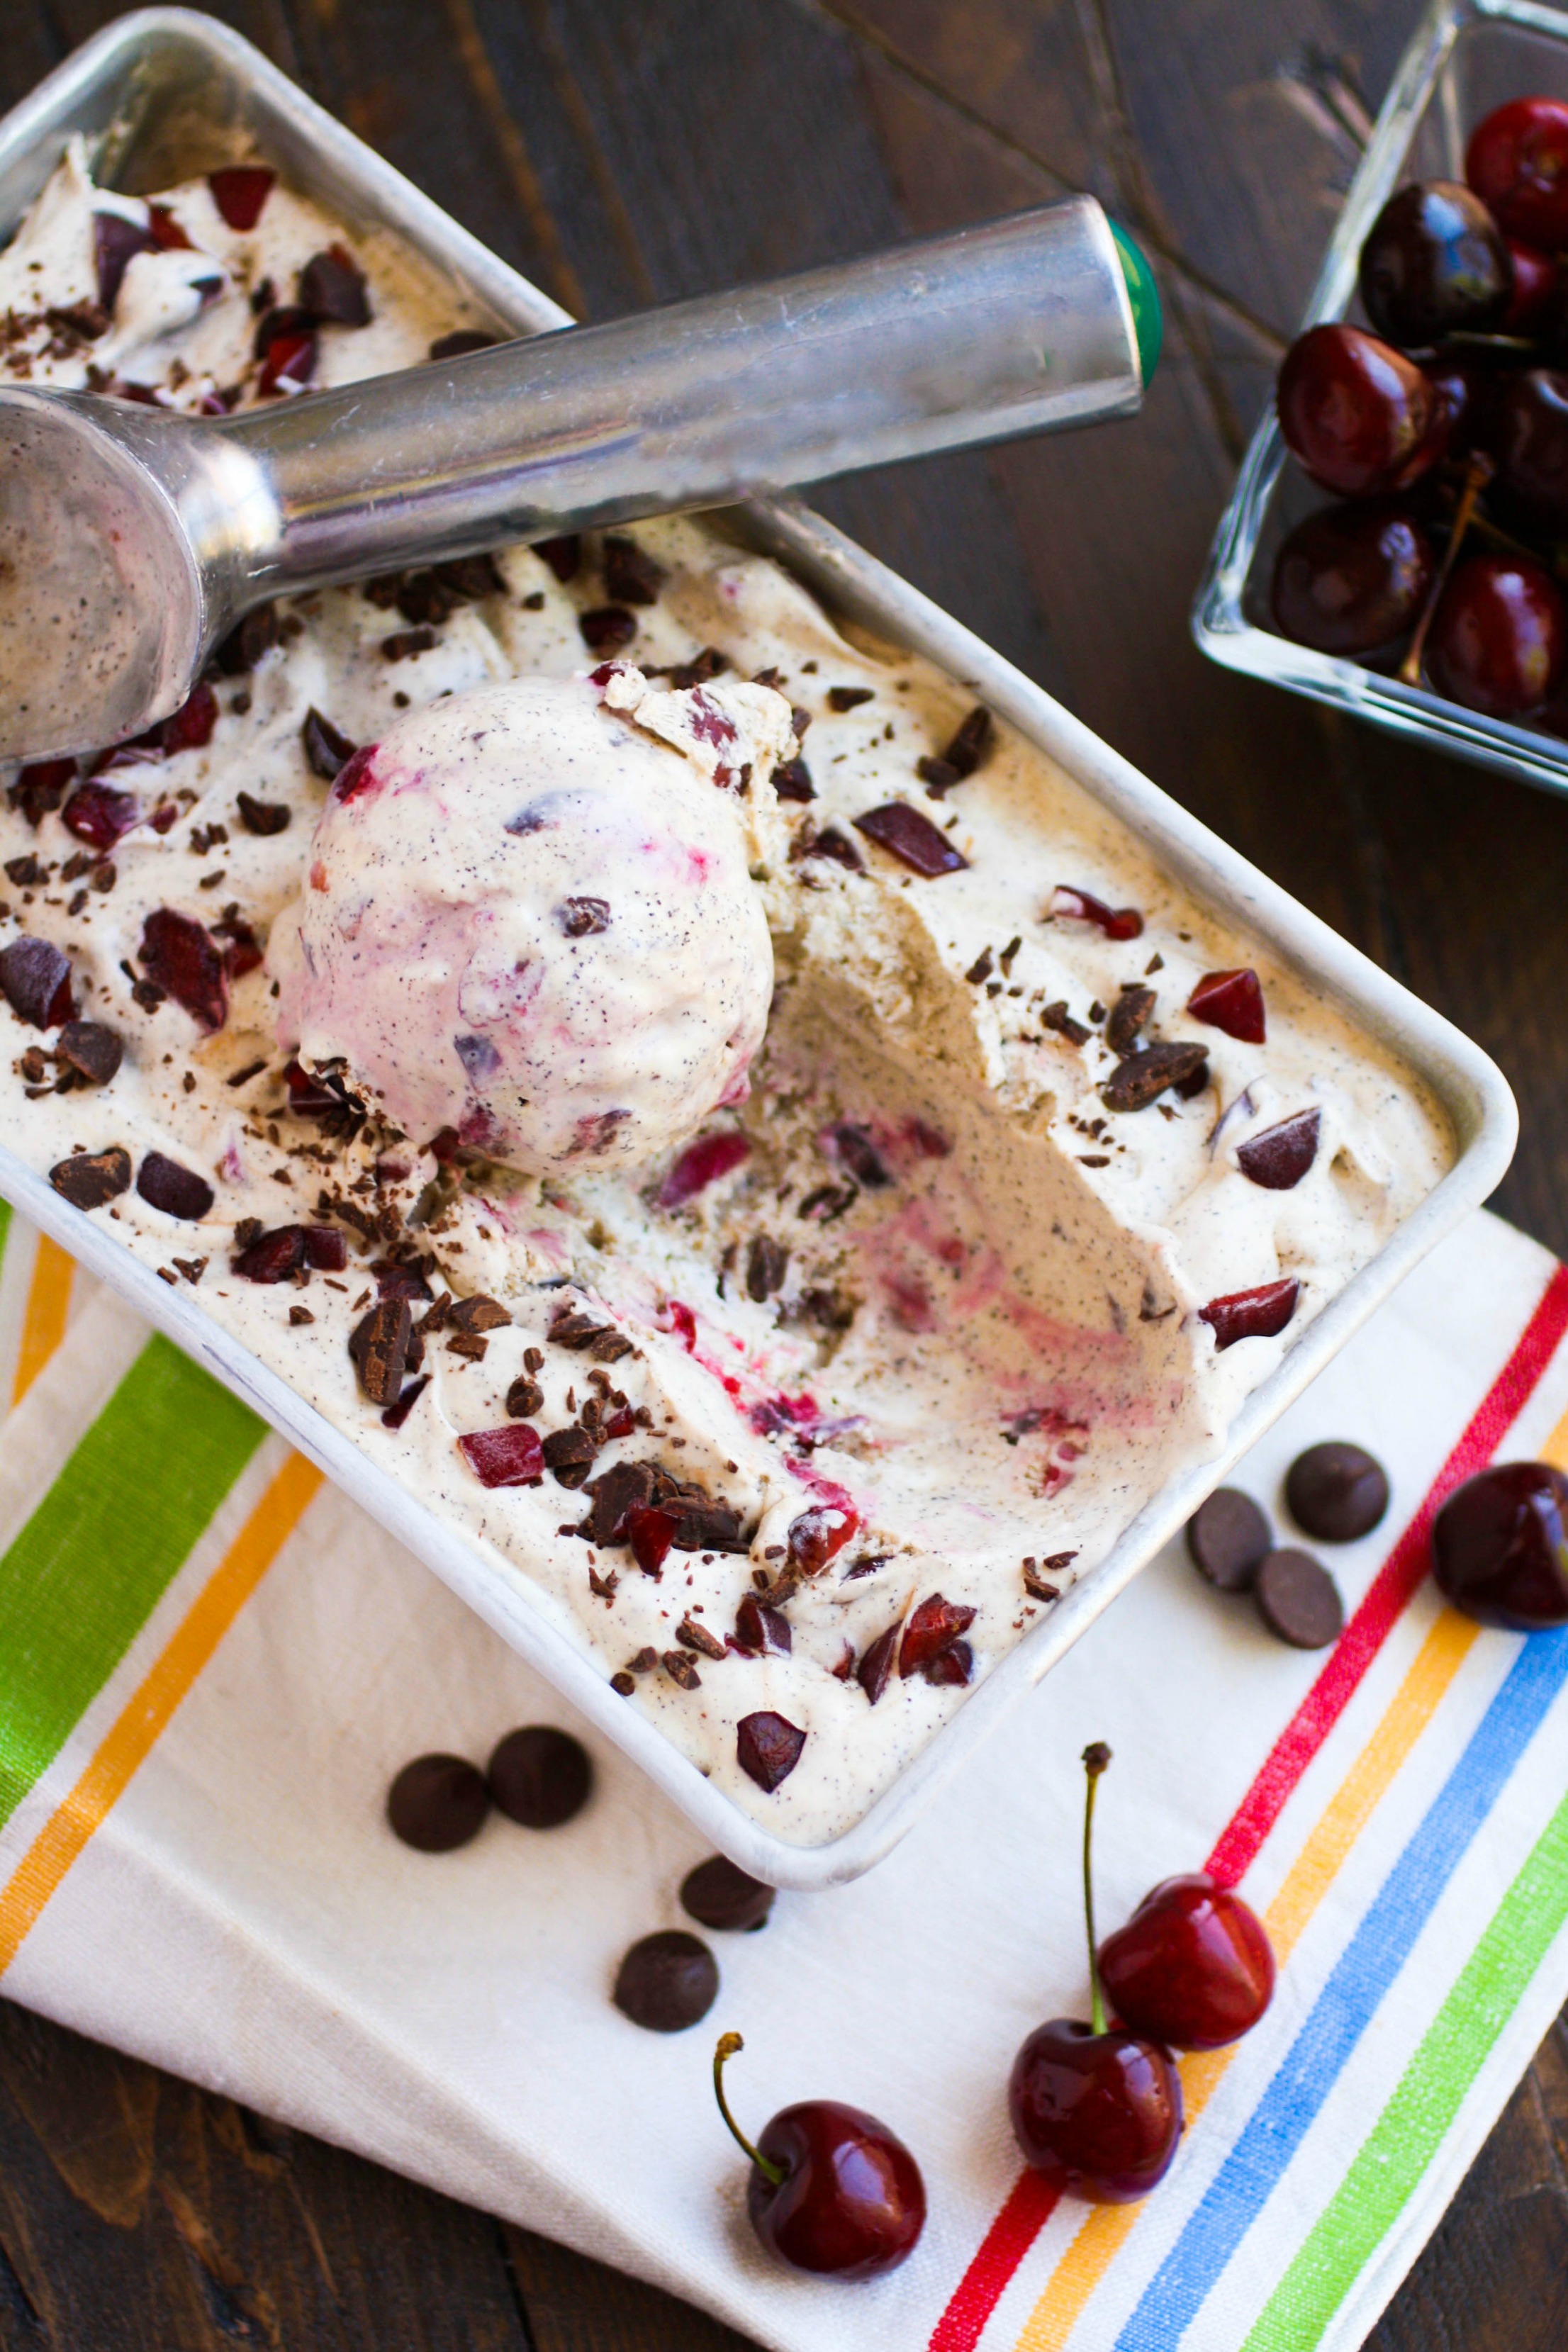 No Churn Cherry Chocolate Chip Espresso Ice Cream has it all! You'll love the ingredients, and how easy it is to make!